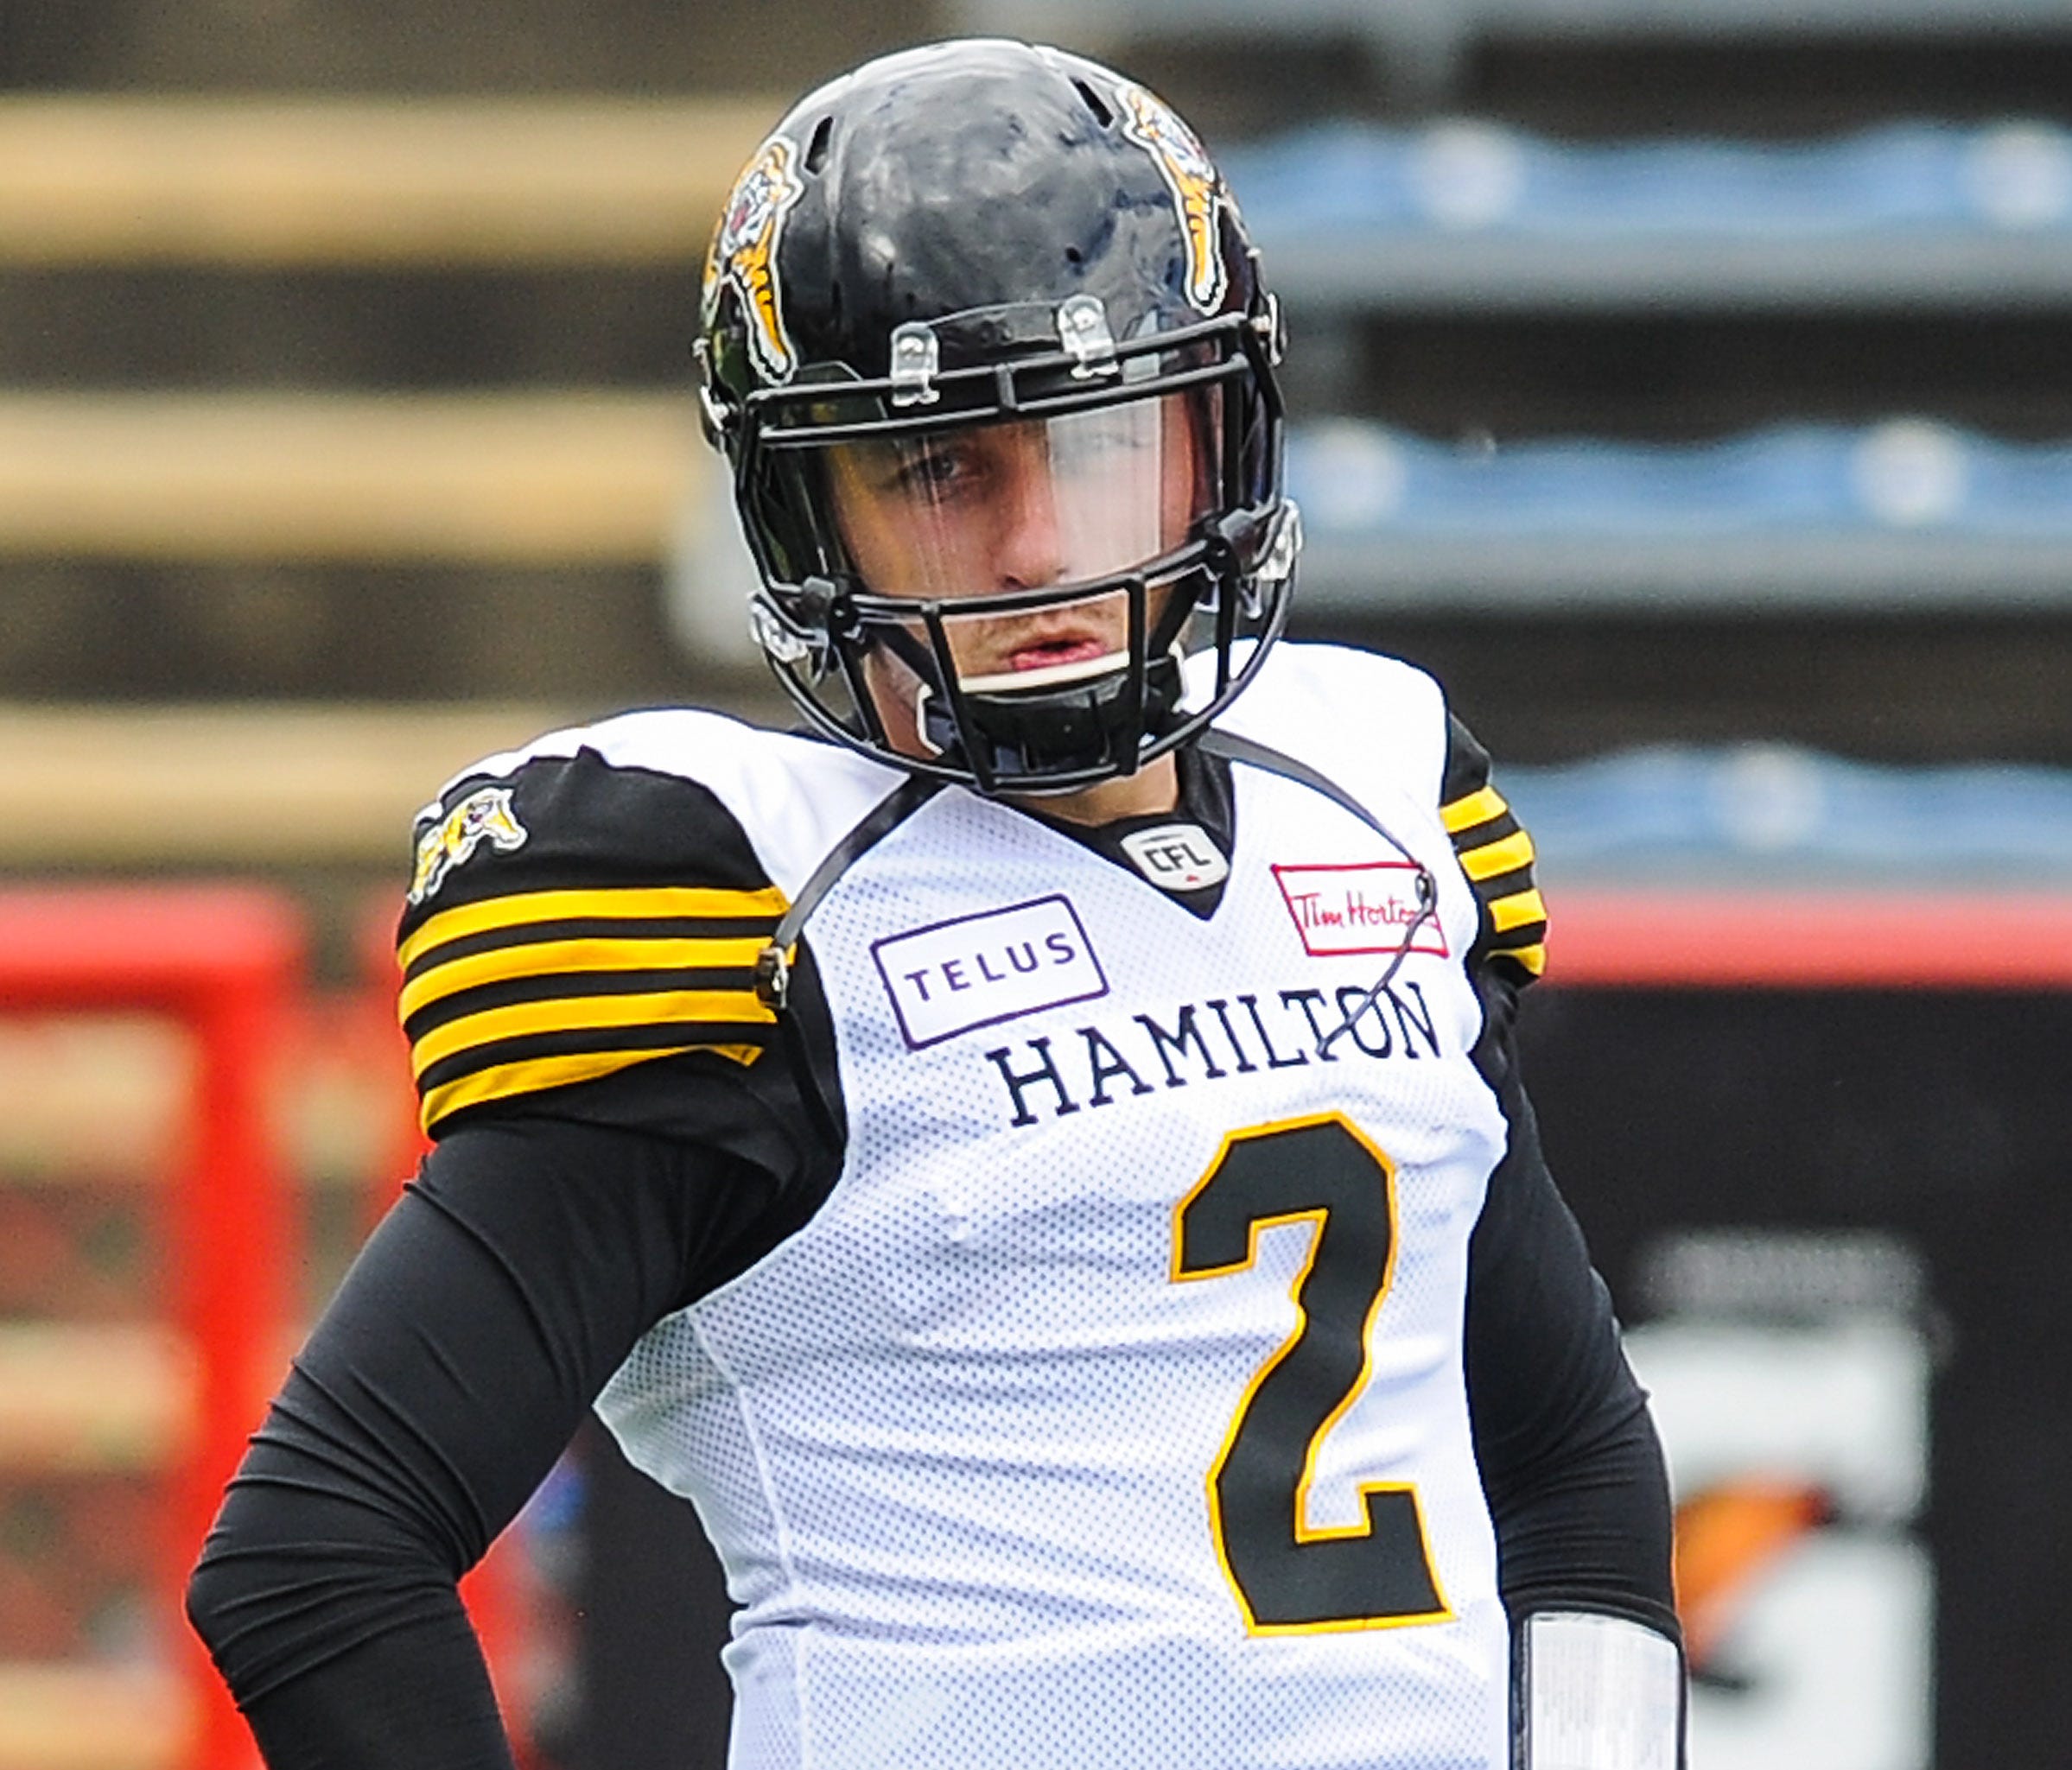 Johnny Manziel was a backup for the Hamilton Tiger-Cats in what is his first season in the CFL.